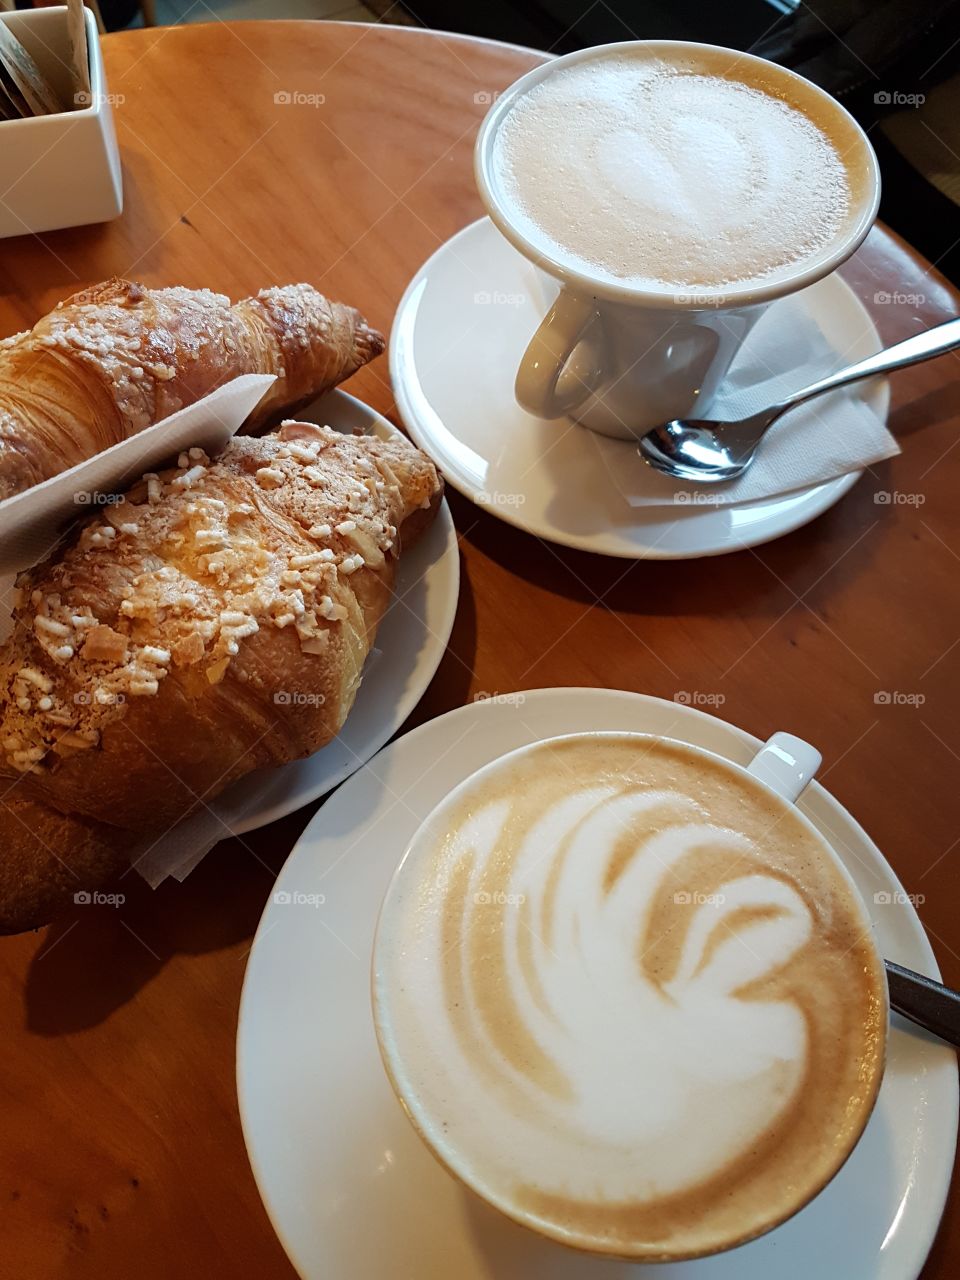 Cup of coffee with croissant